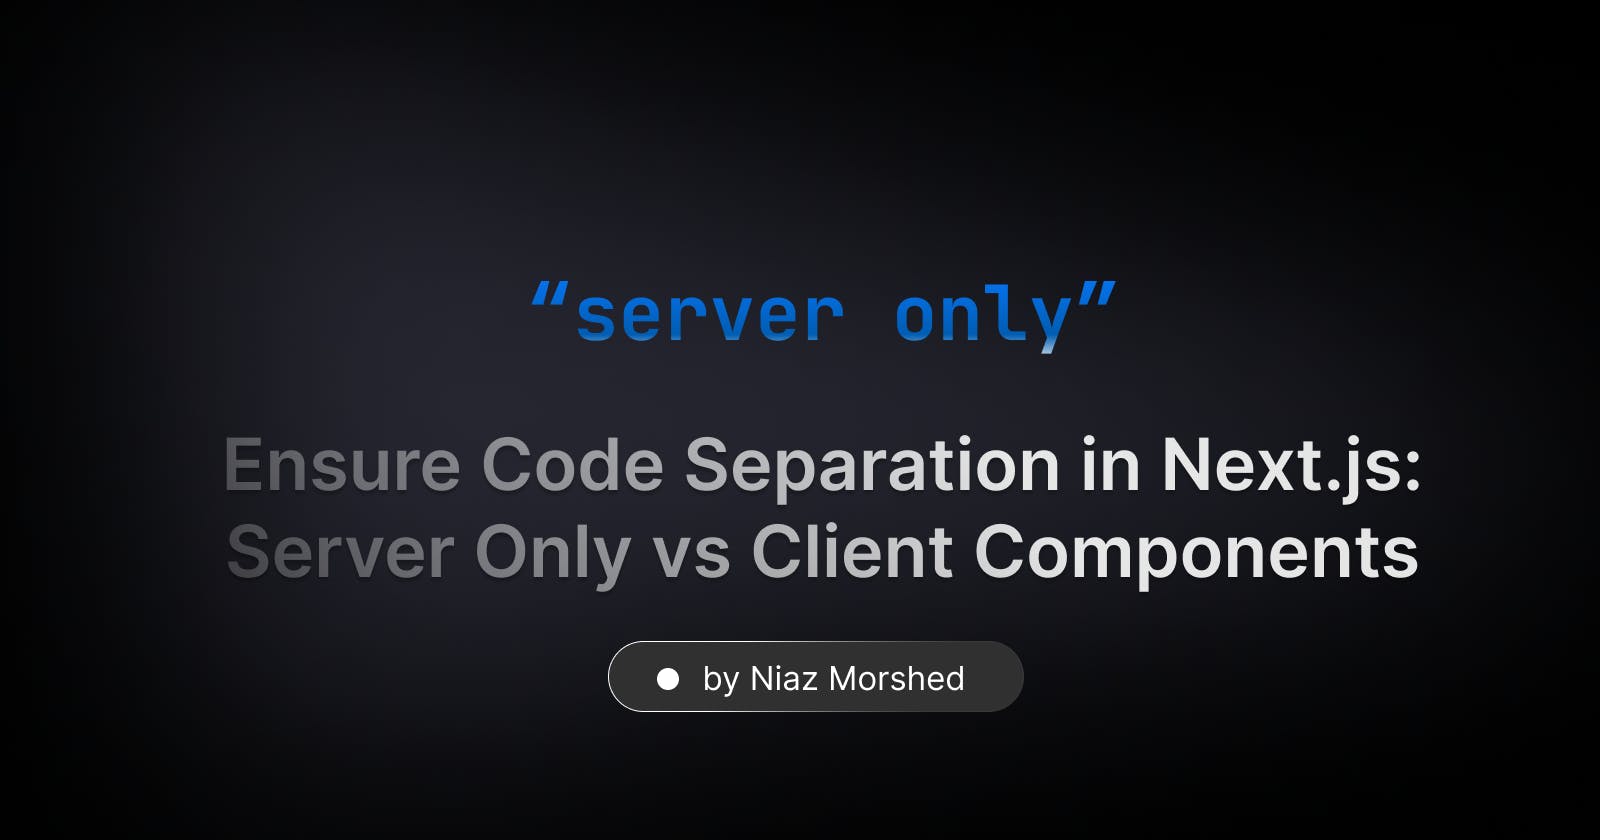 Ensure Code Separation in Next.js: Server Only vs Client Components